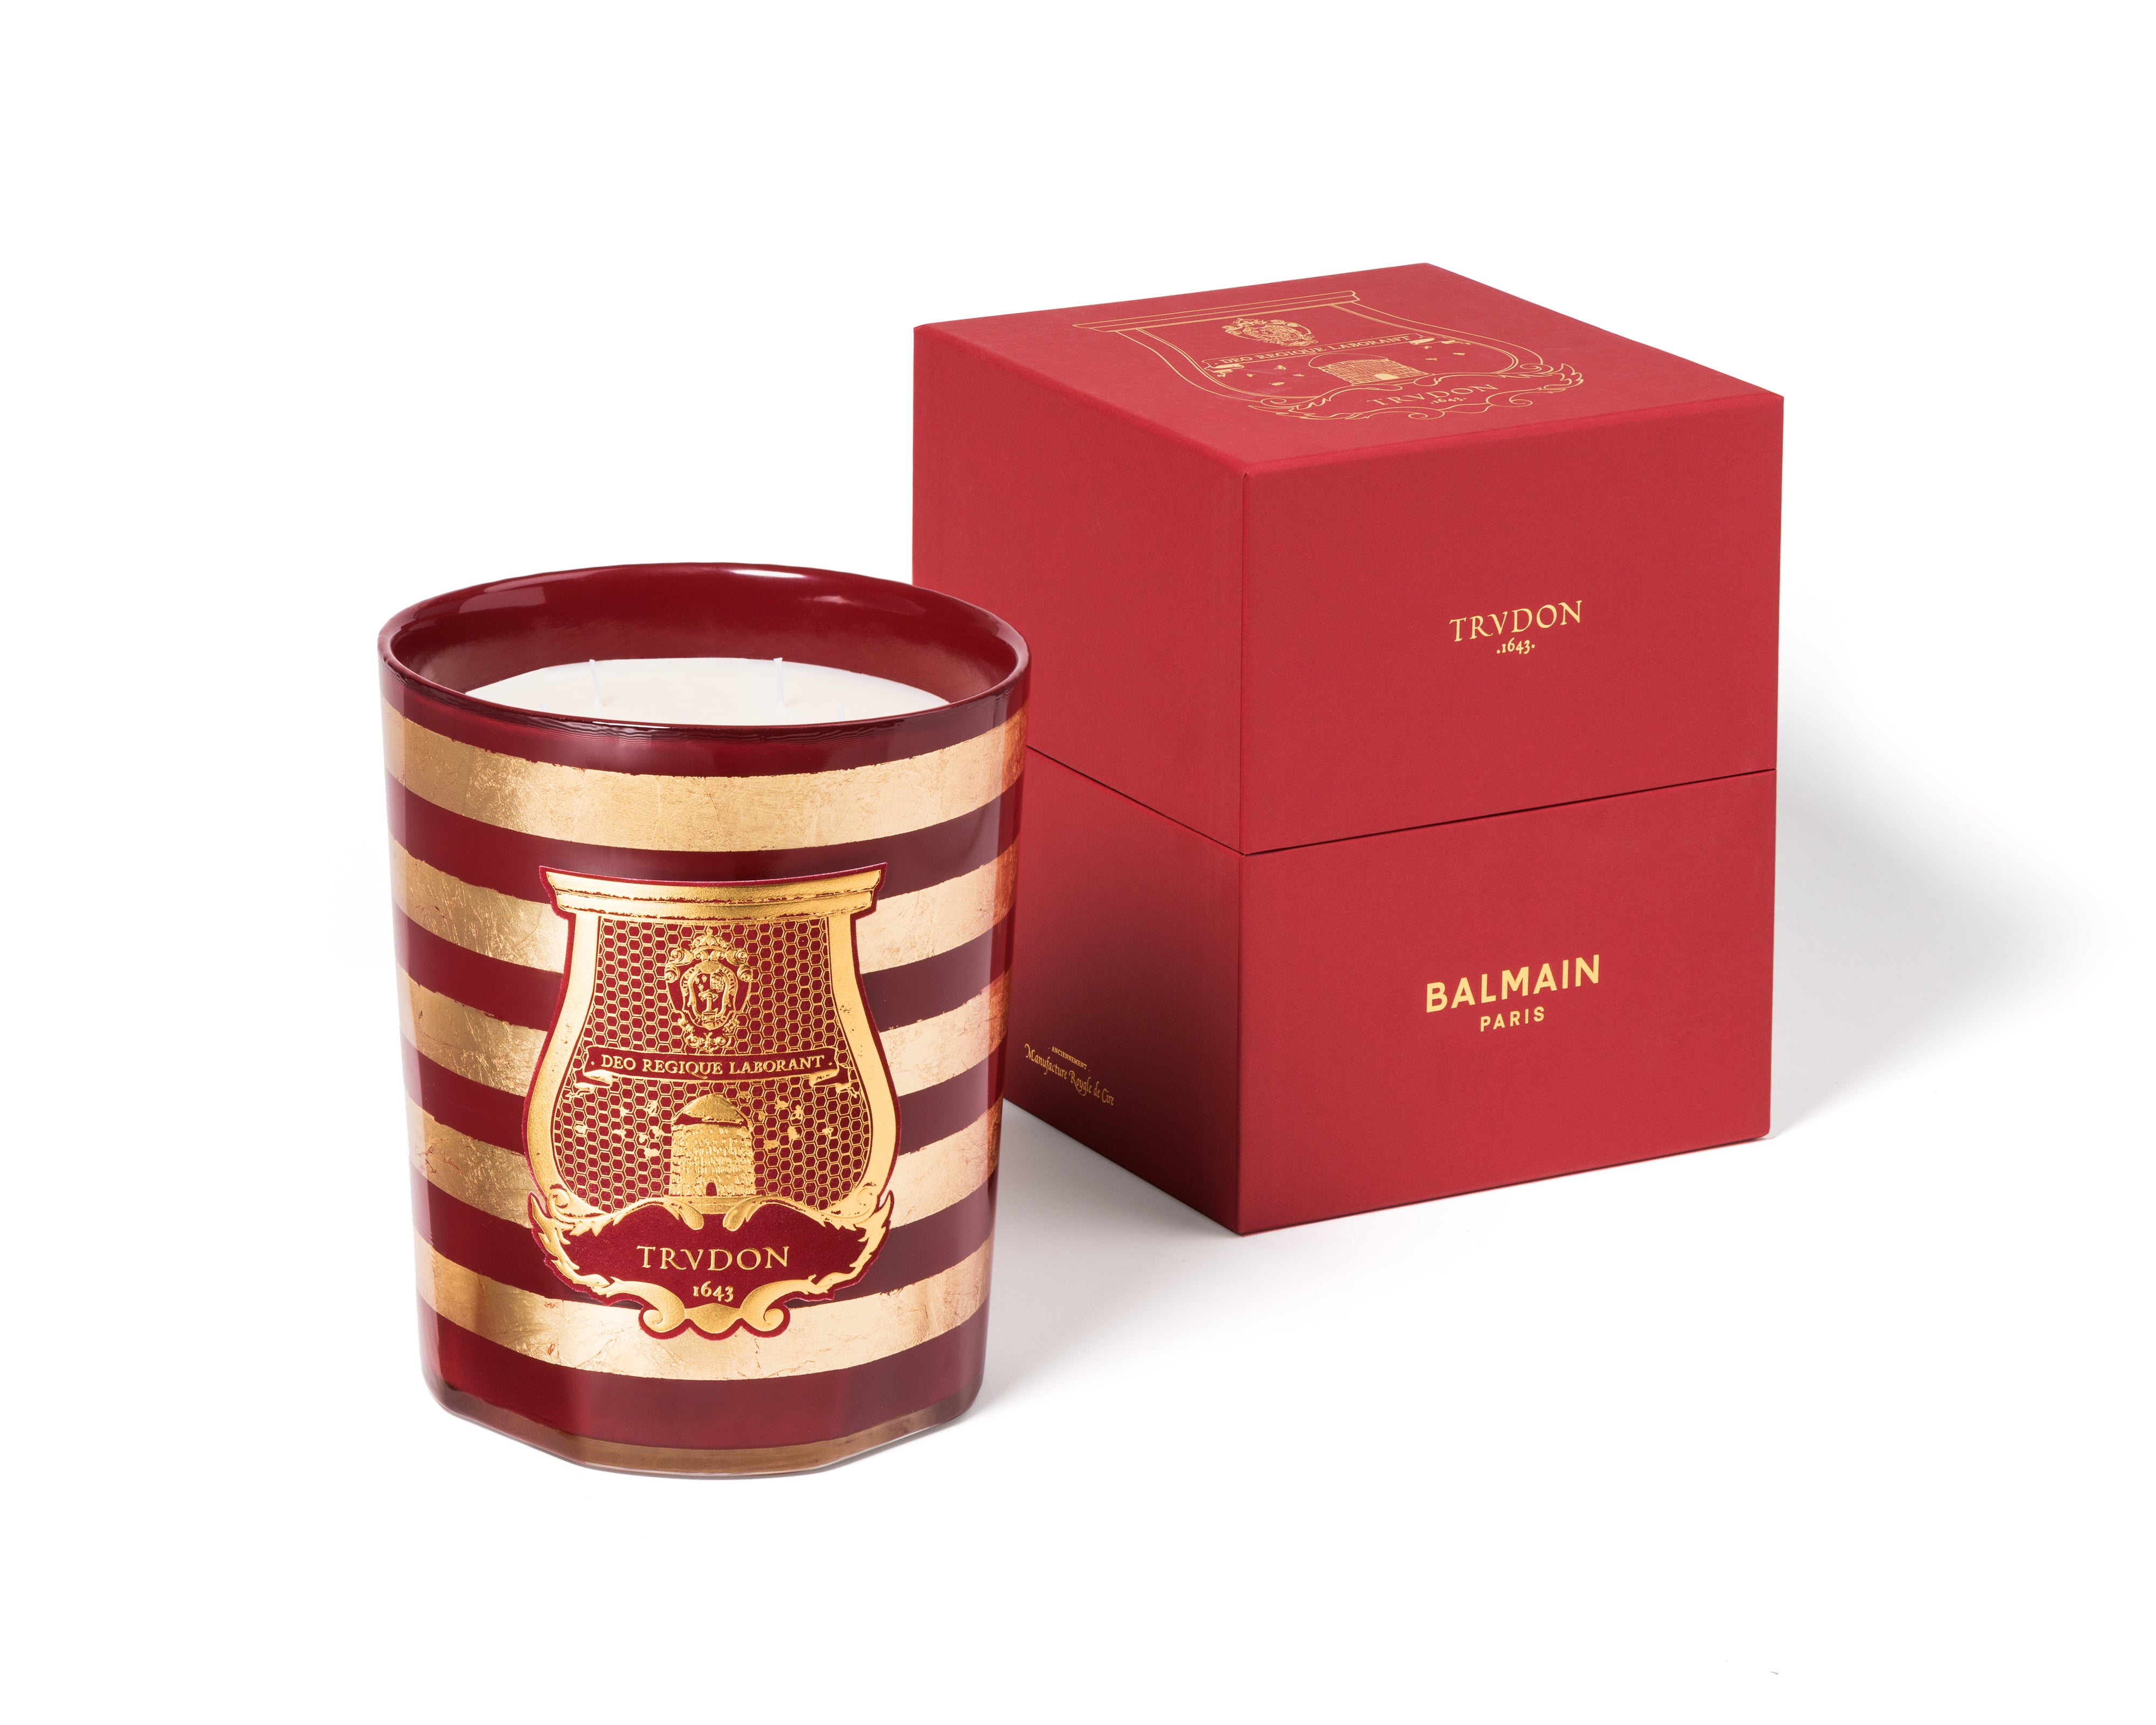 Cire Trudon x Balmain Limited Edition Candle Grande 3KG - Red